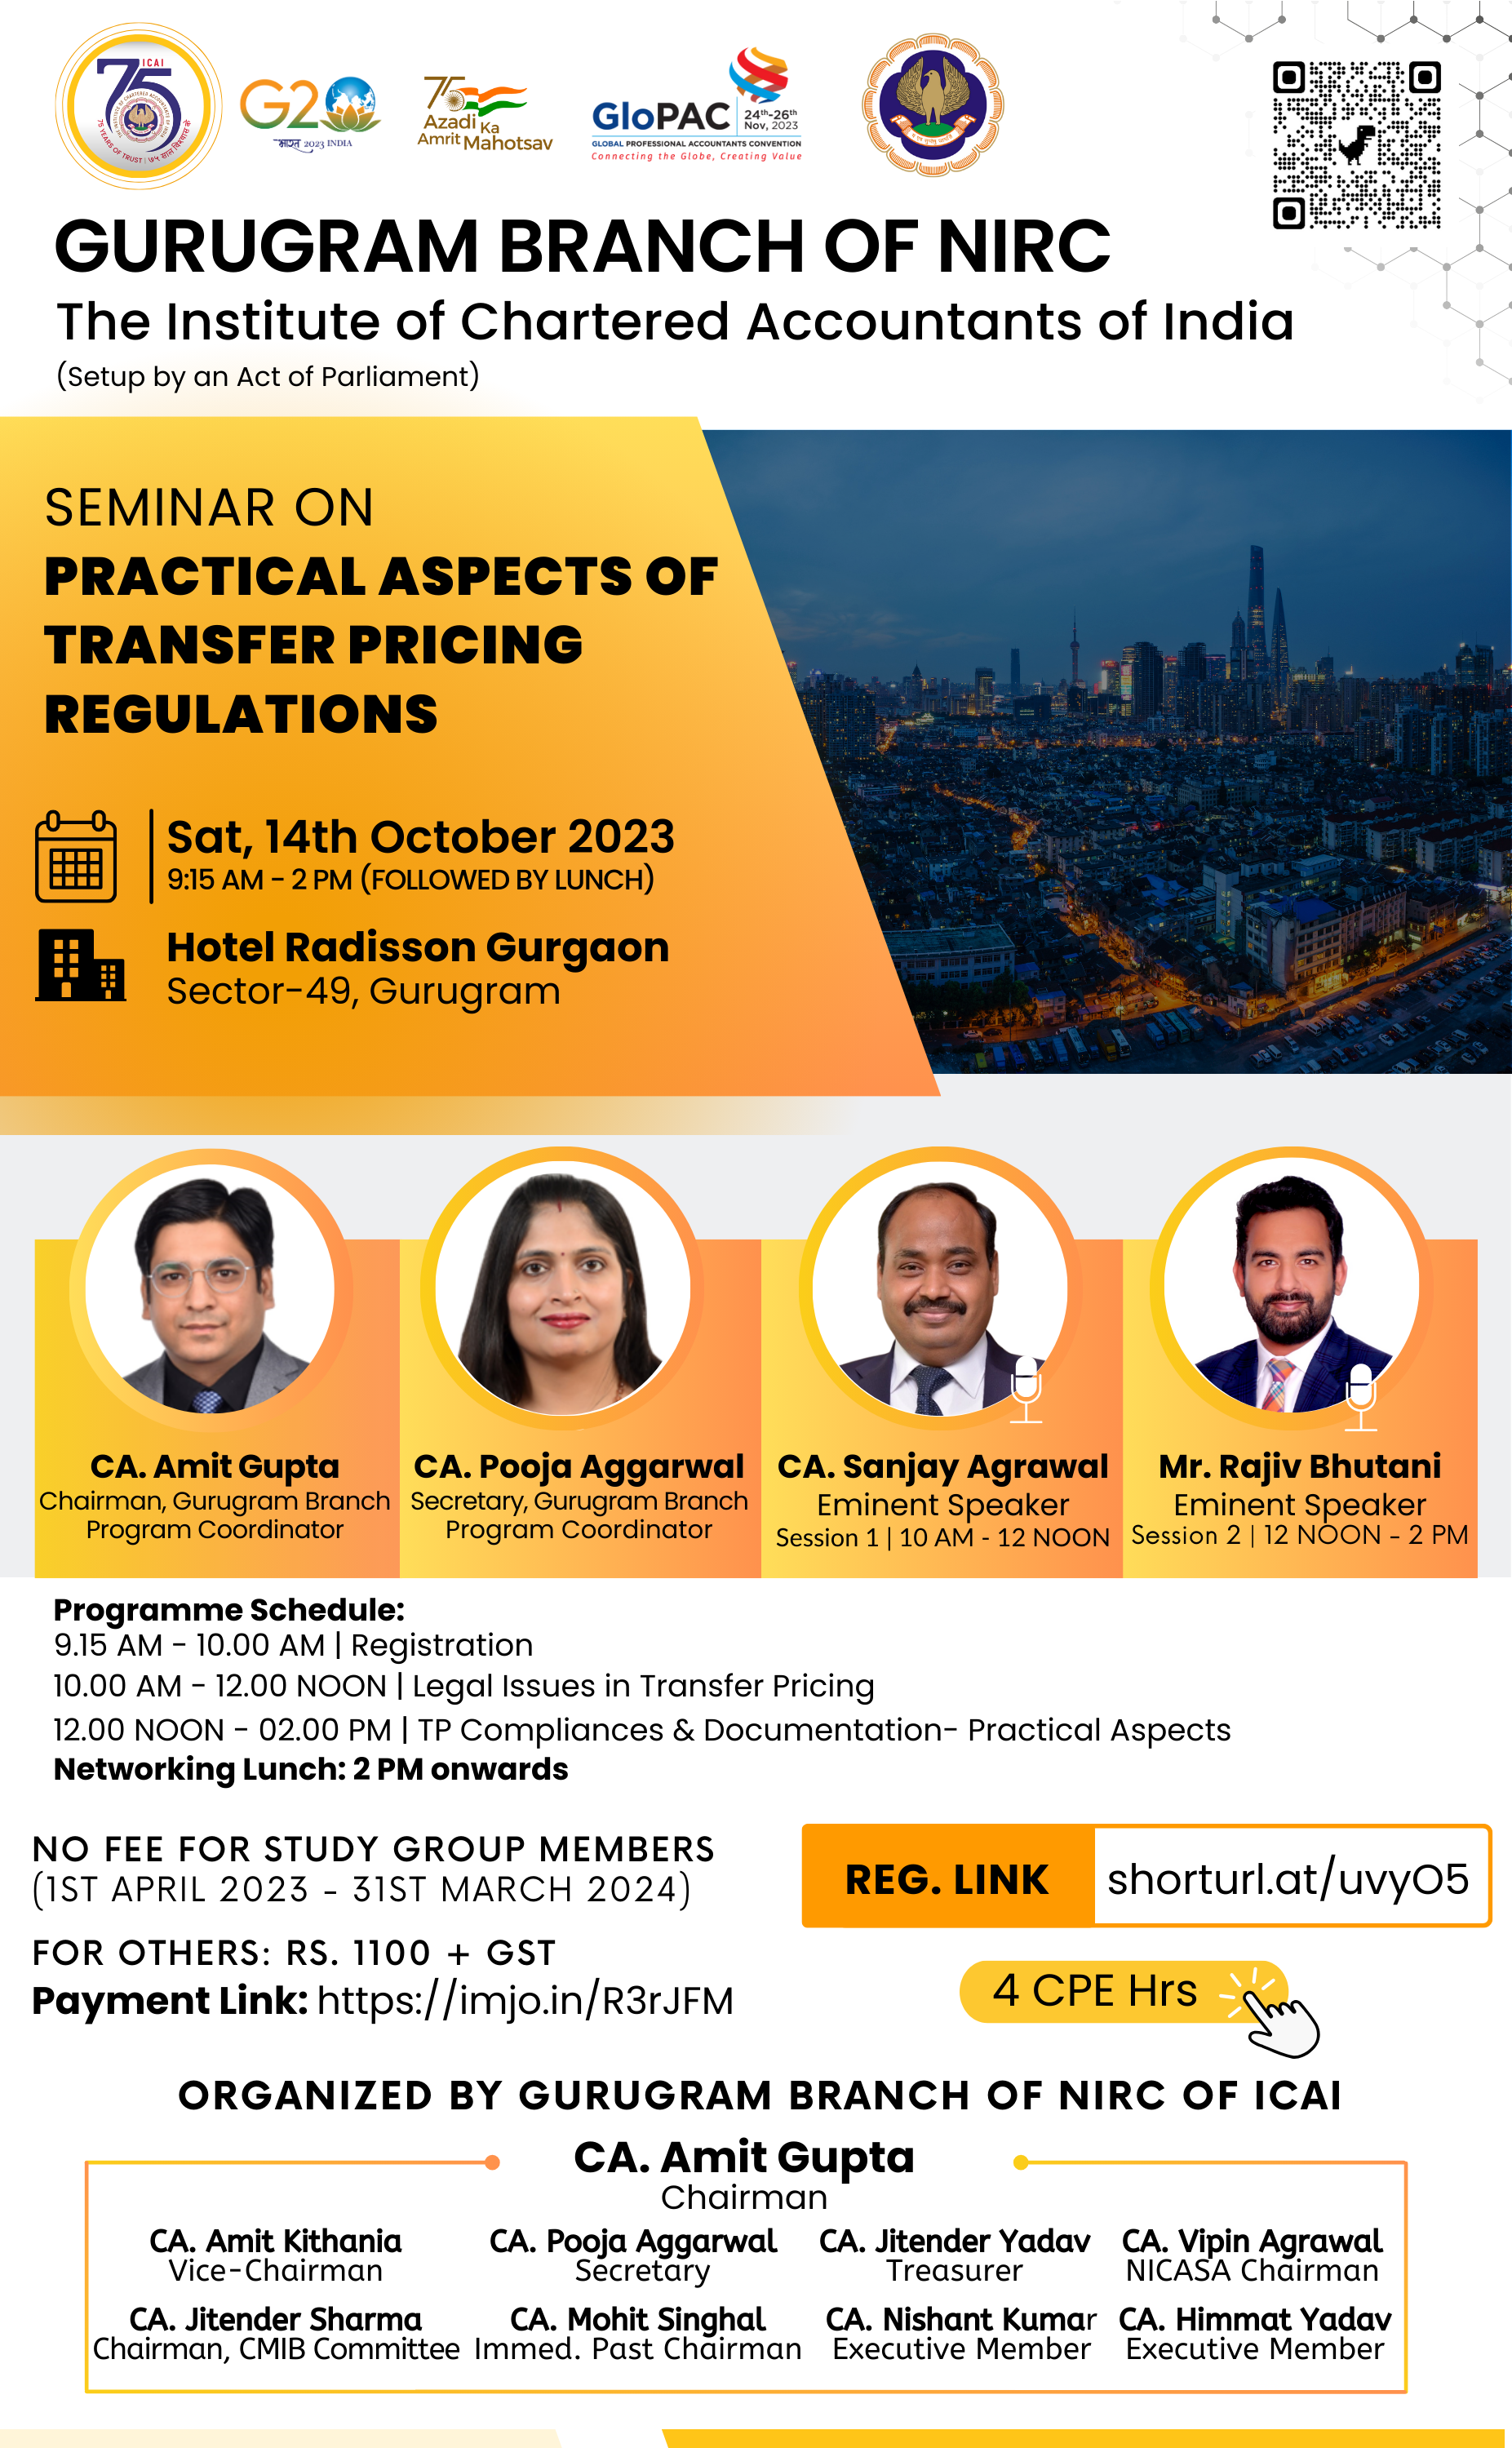 Seminar on Practical Aspects of Transfer Pricing Regulations